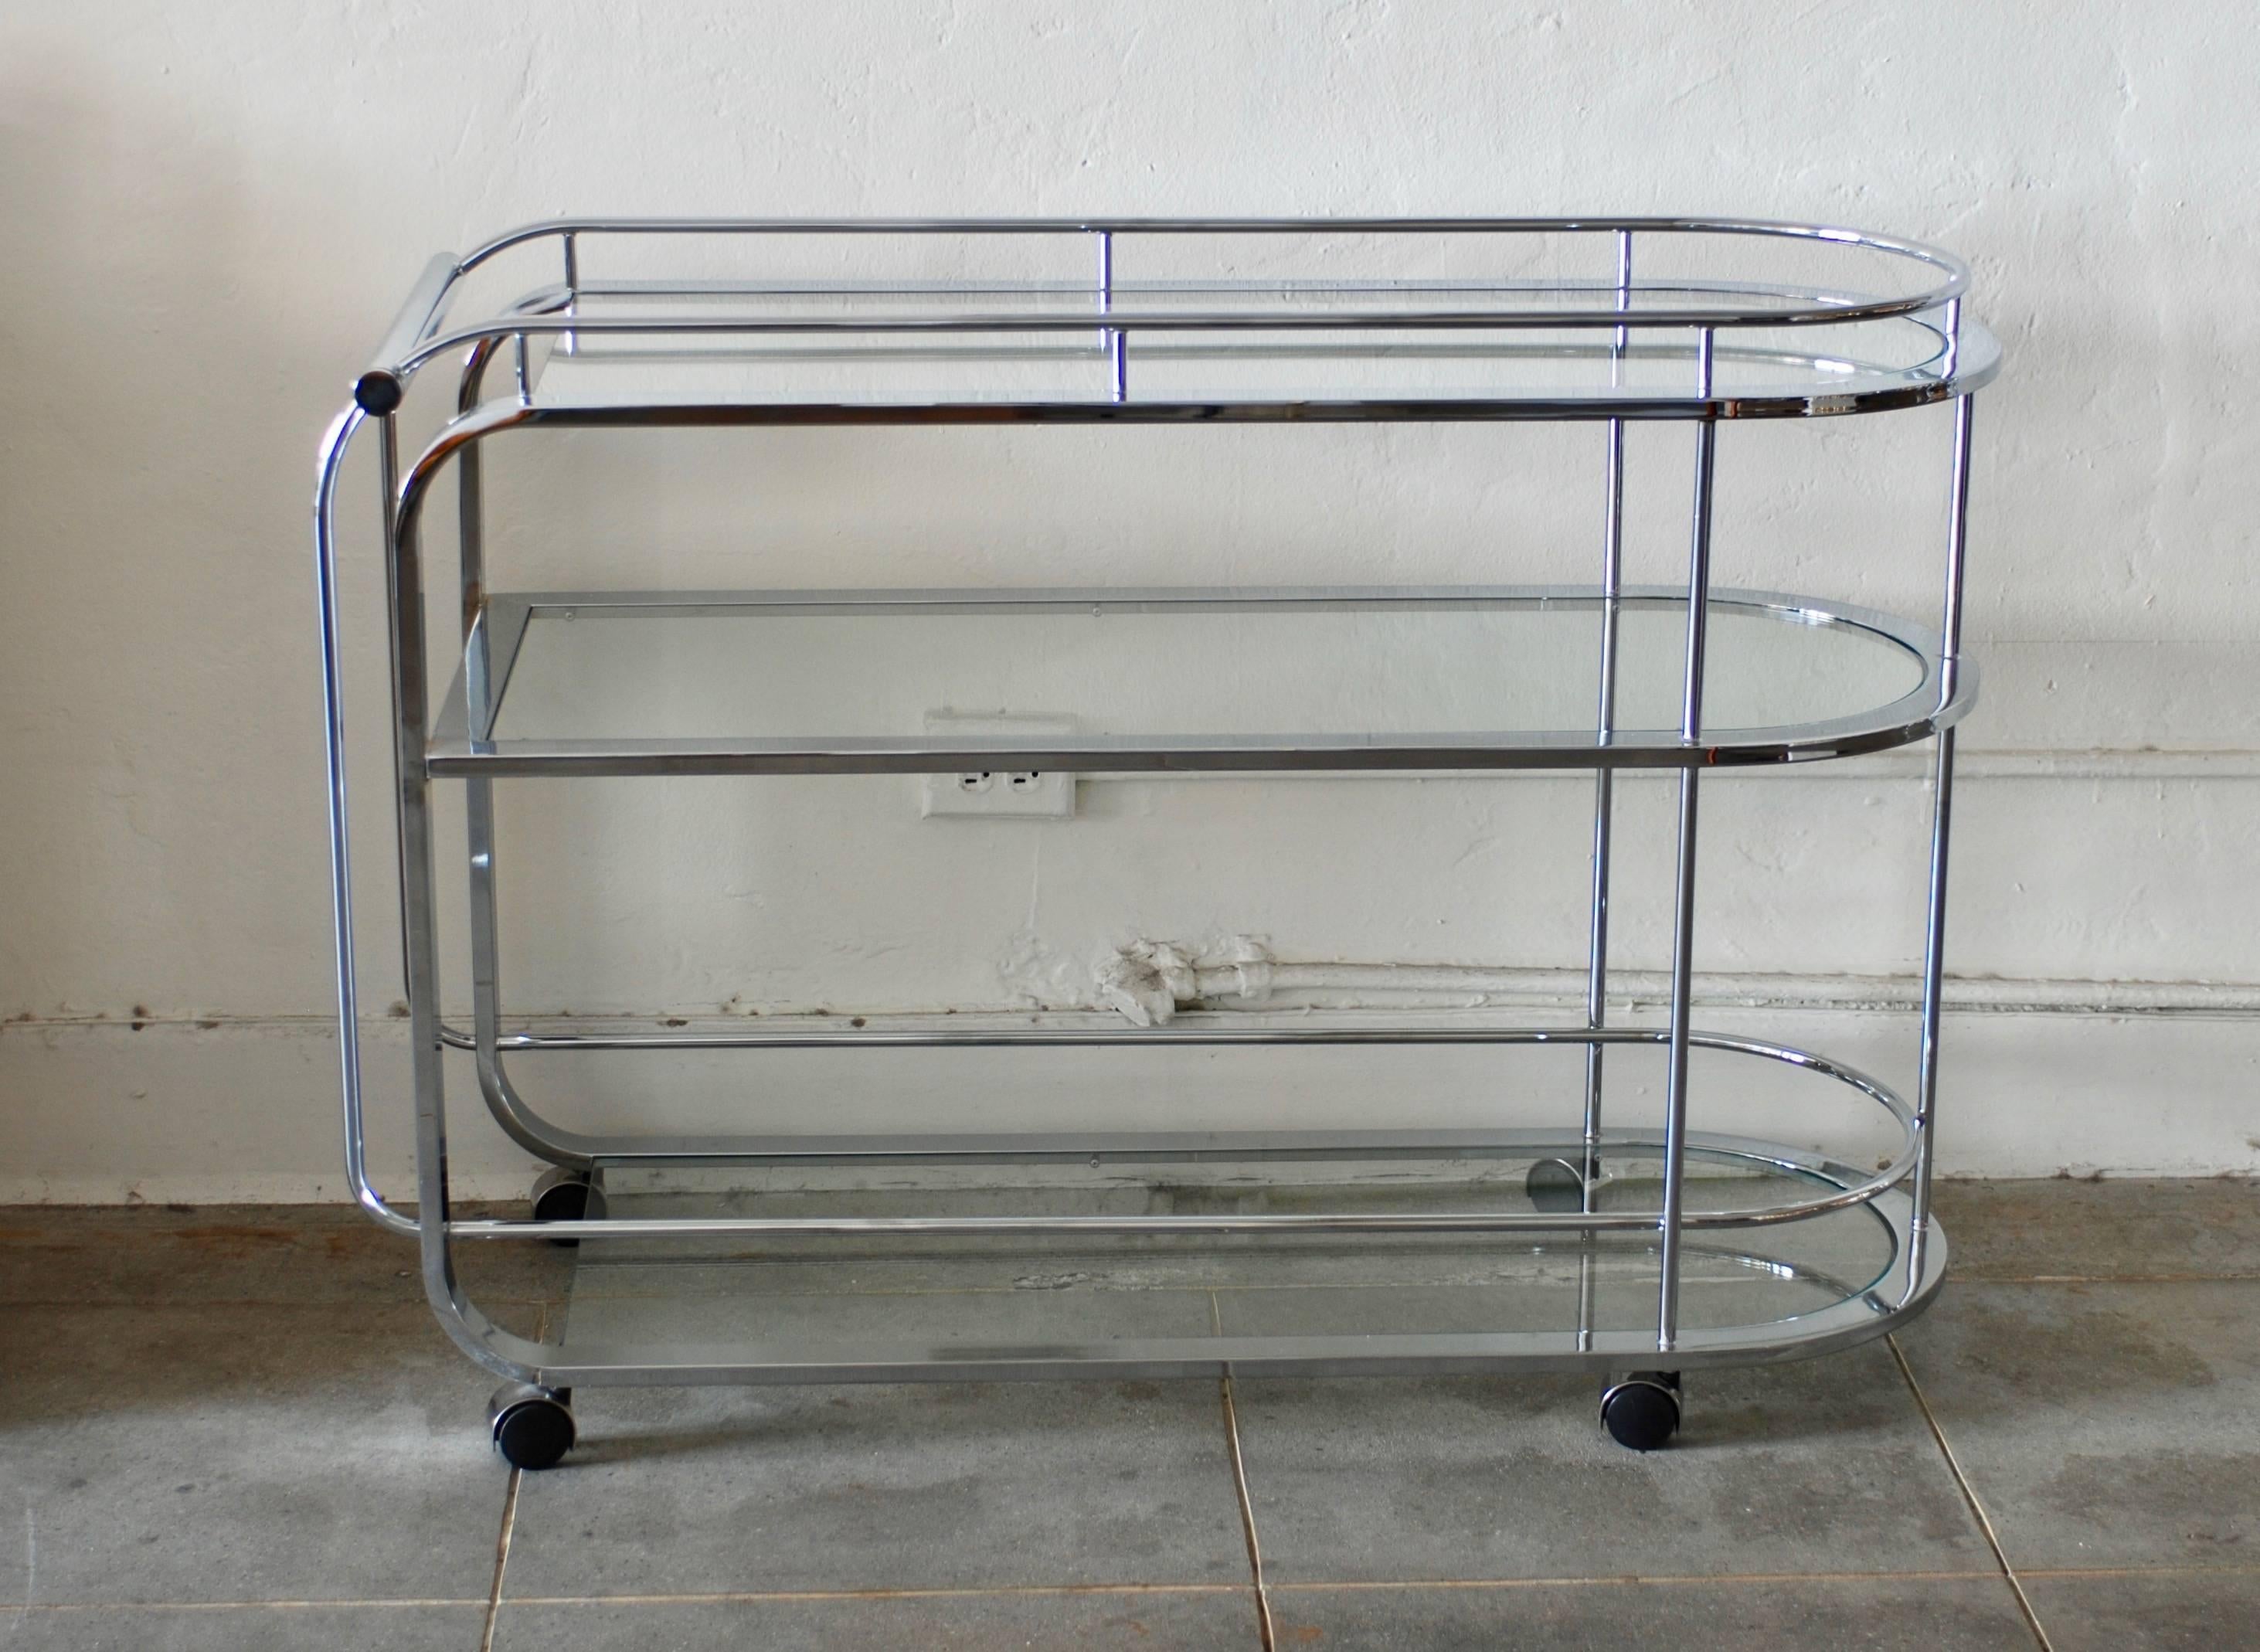 A sleek moderne style bar cart with nice curves. The bar cart or tea trolley has three-glass shelves. The length of it gives ample serving room. The last photos of the vintage glassware and barware is for scale and demonstration purposes and is not